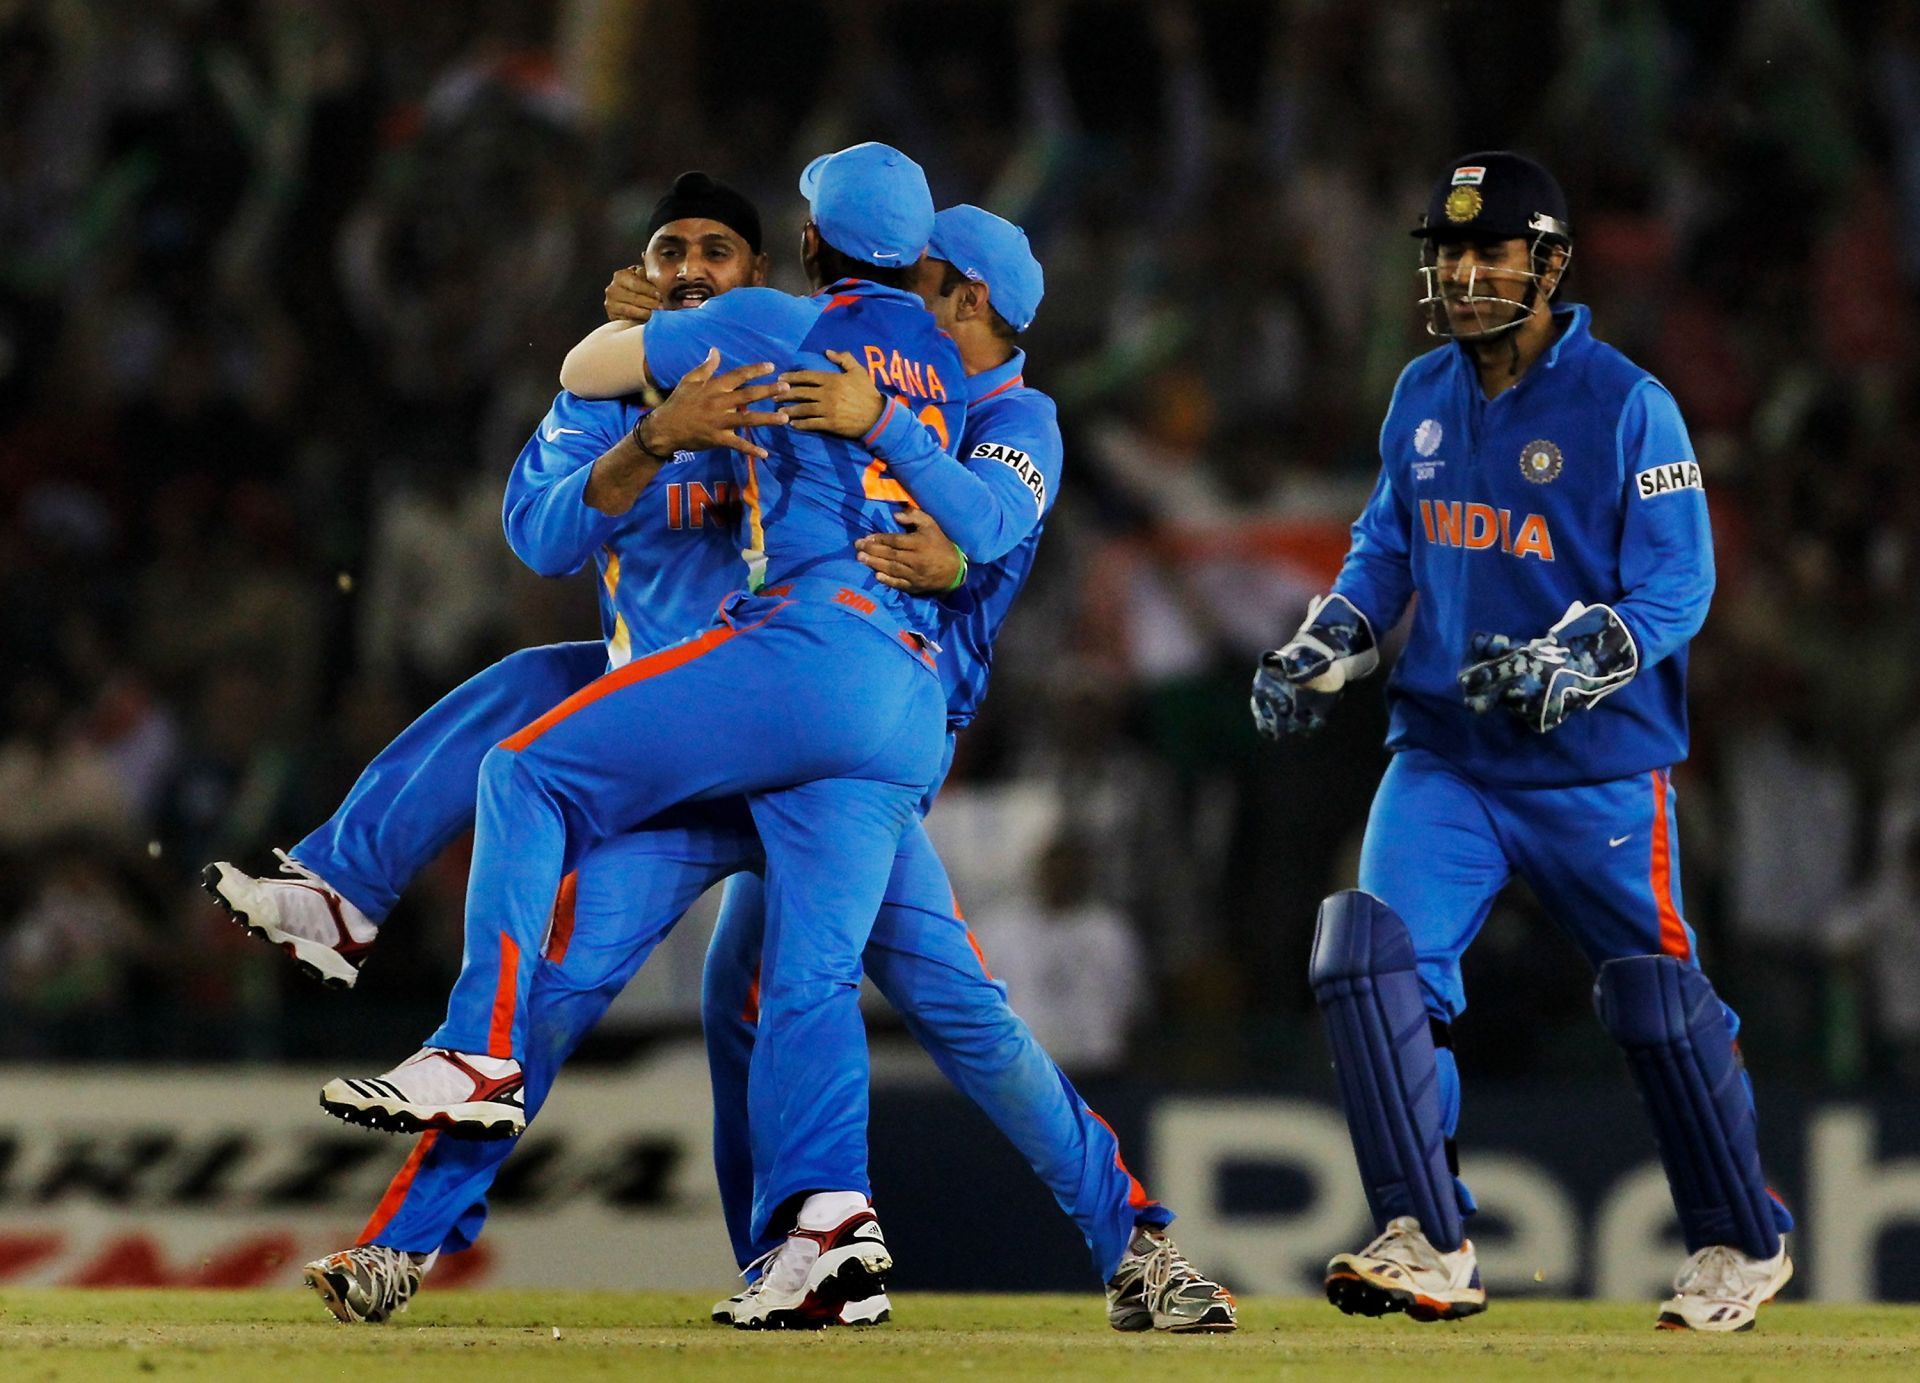 Harbhajan Singh celebrates with teammates as MS Dhoni looks on. Pic: Getty Images